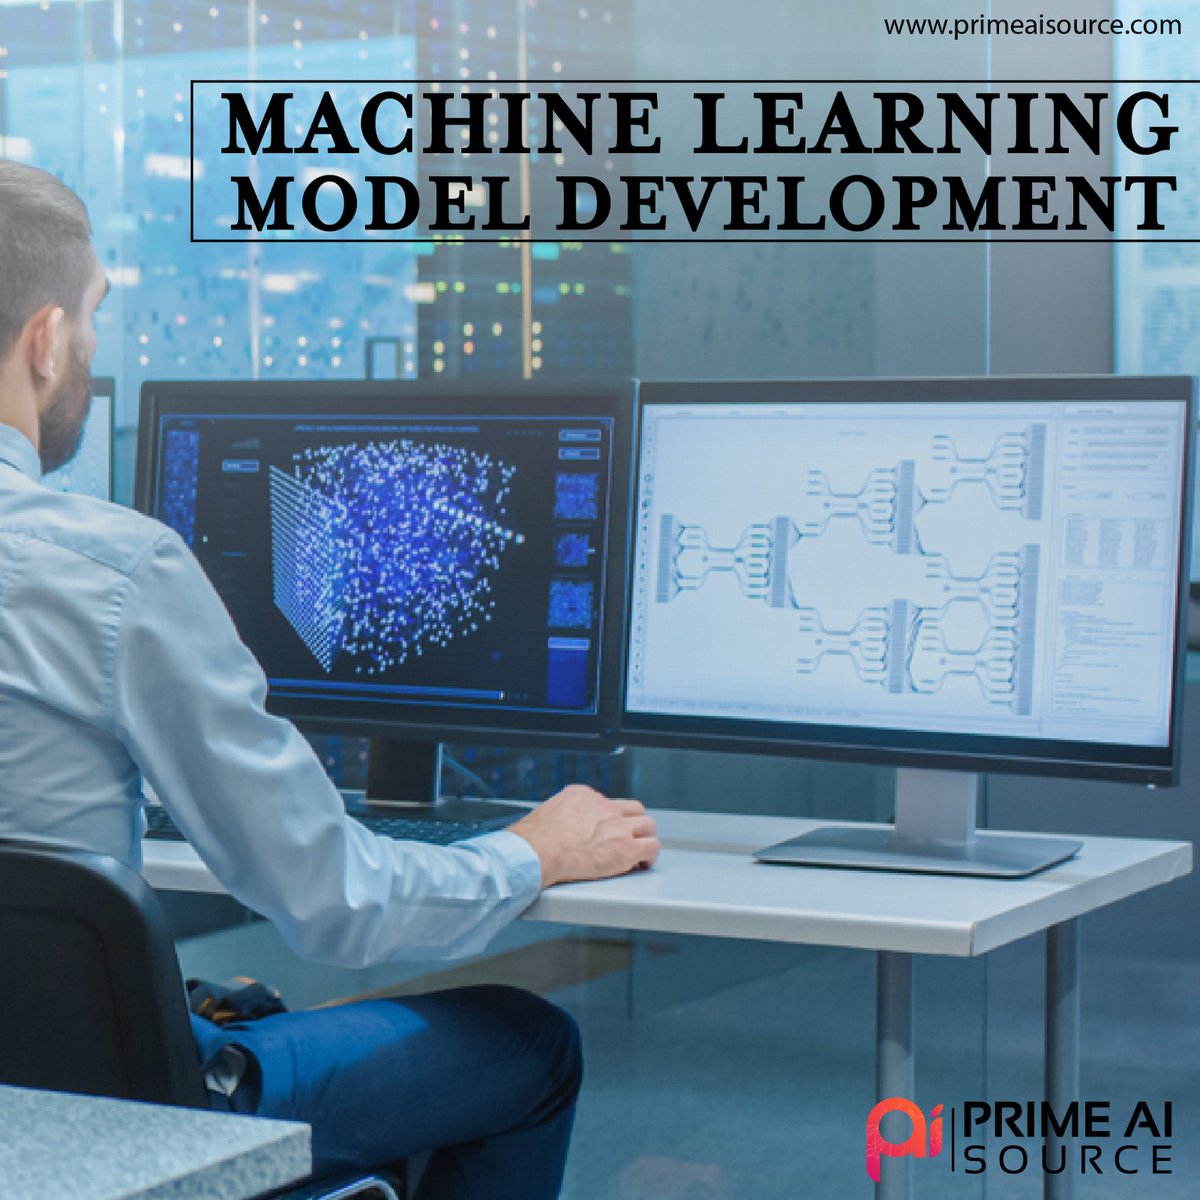 Unlock the power of machine learning and propel your business forward. Our expert team of data scientists and engineers will develop cutting-edge machine learning models tailored to your unique business needs. 
.
.
#machinelearning #primeaisource #modeldevelopment